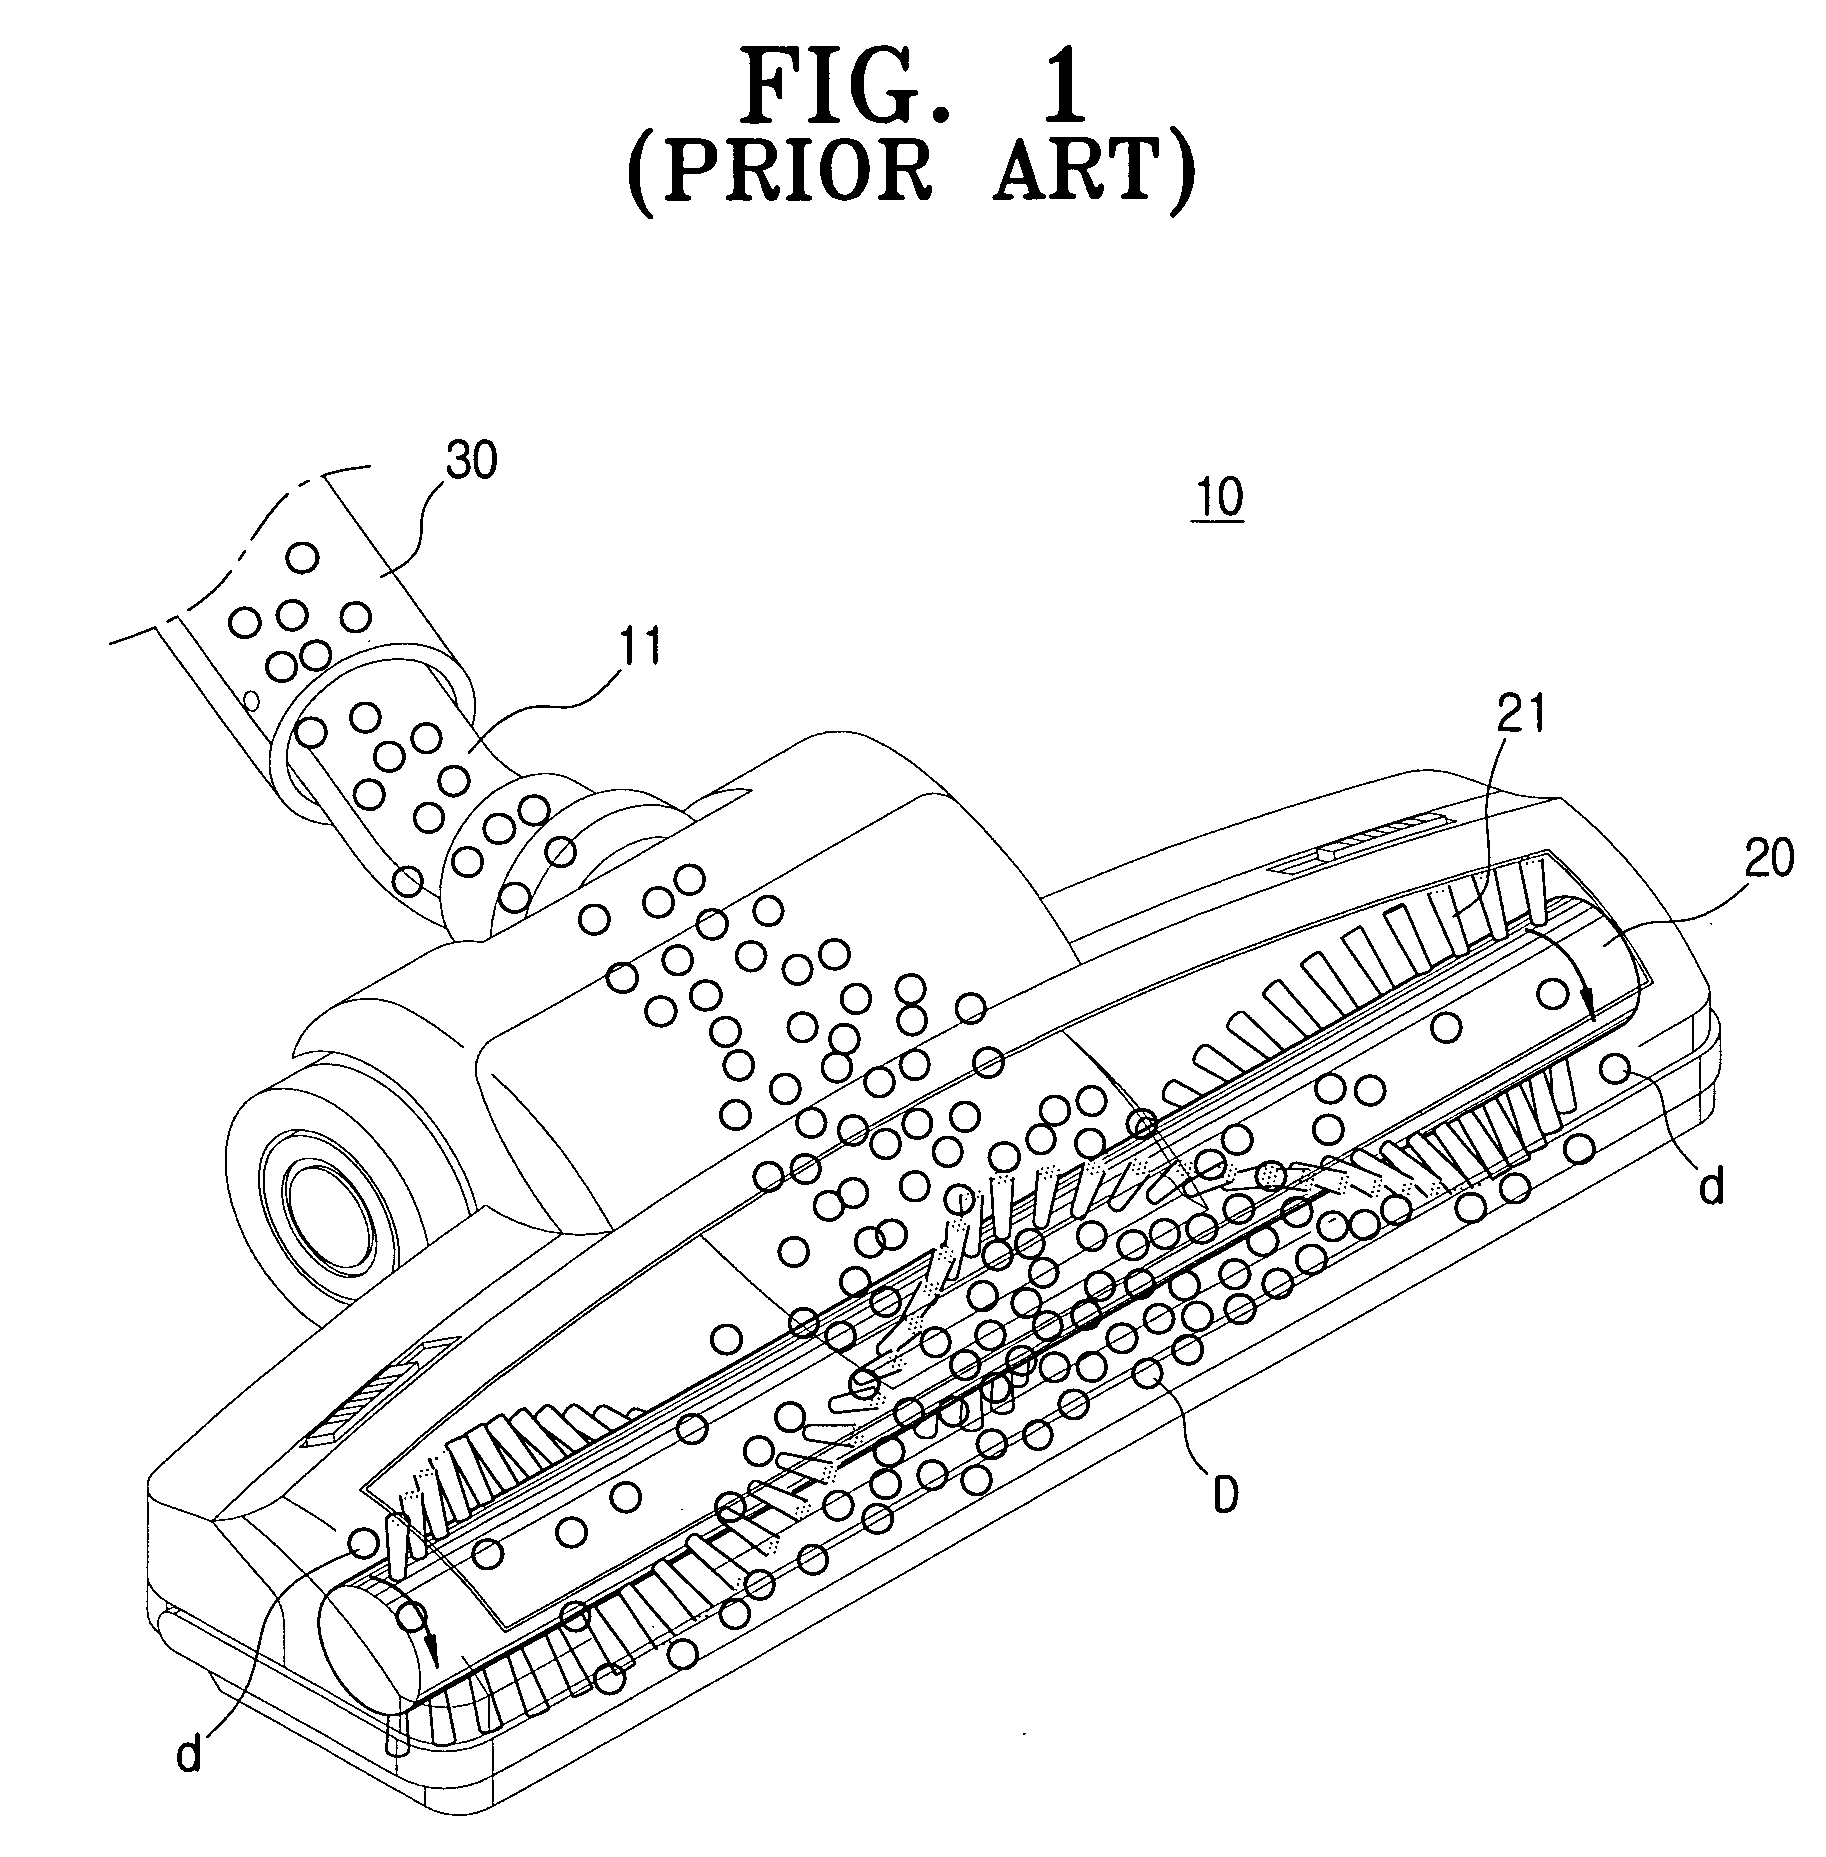 Agitator and suction nozzle for vacuum cleaner having the same